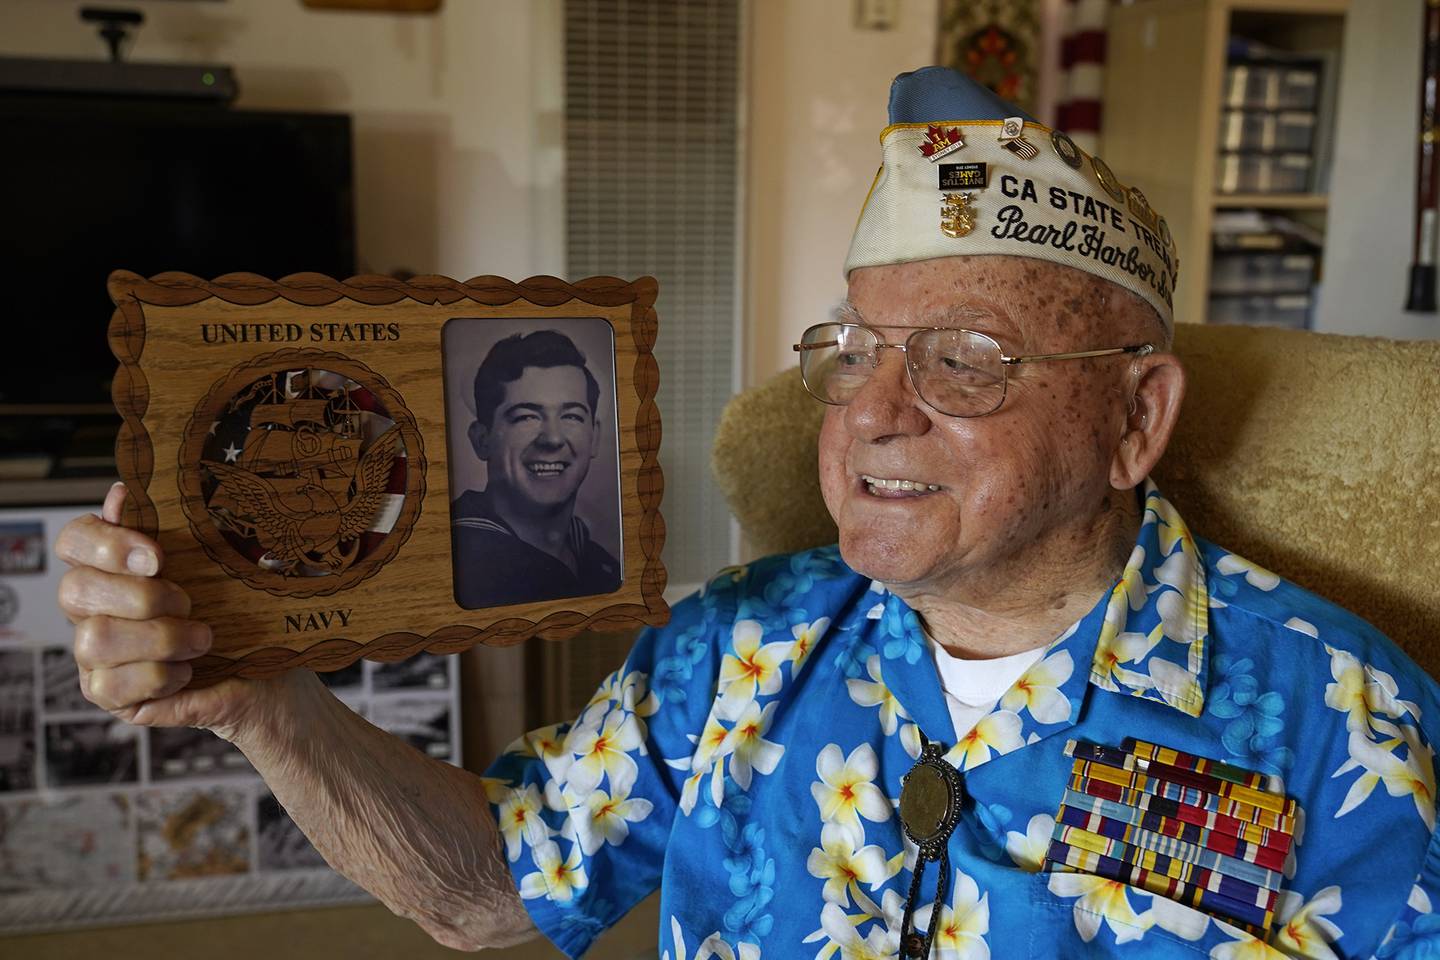 Mickey Ganitch, a survivor of the 1941 attack on Pearl Harbor, holds a plaque with a picture of himself as a young sailor, while sitting in the living room of his home in San Leandro, Calif. Nov. 20, 2020.